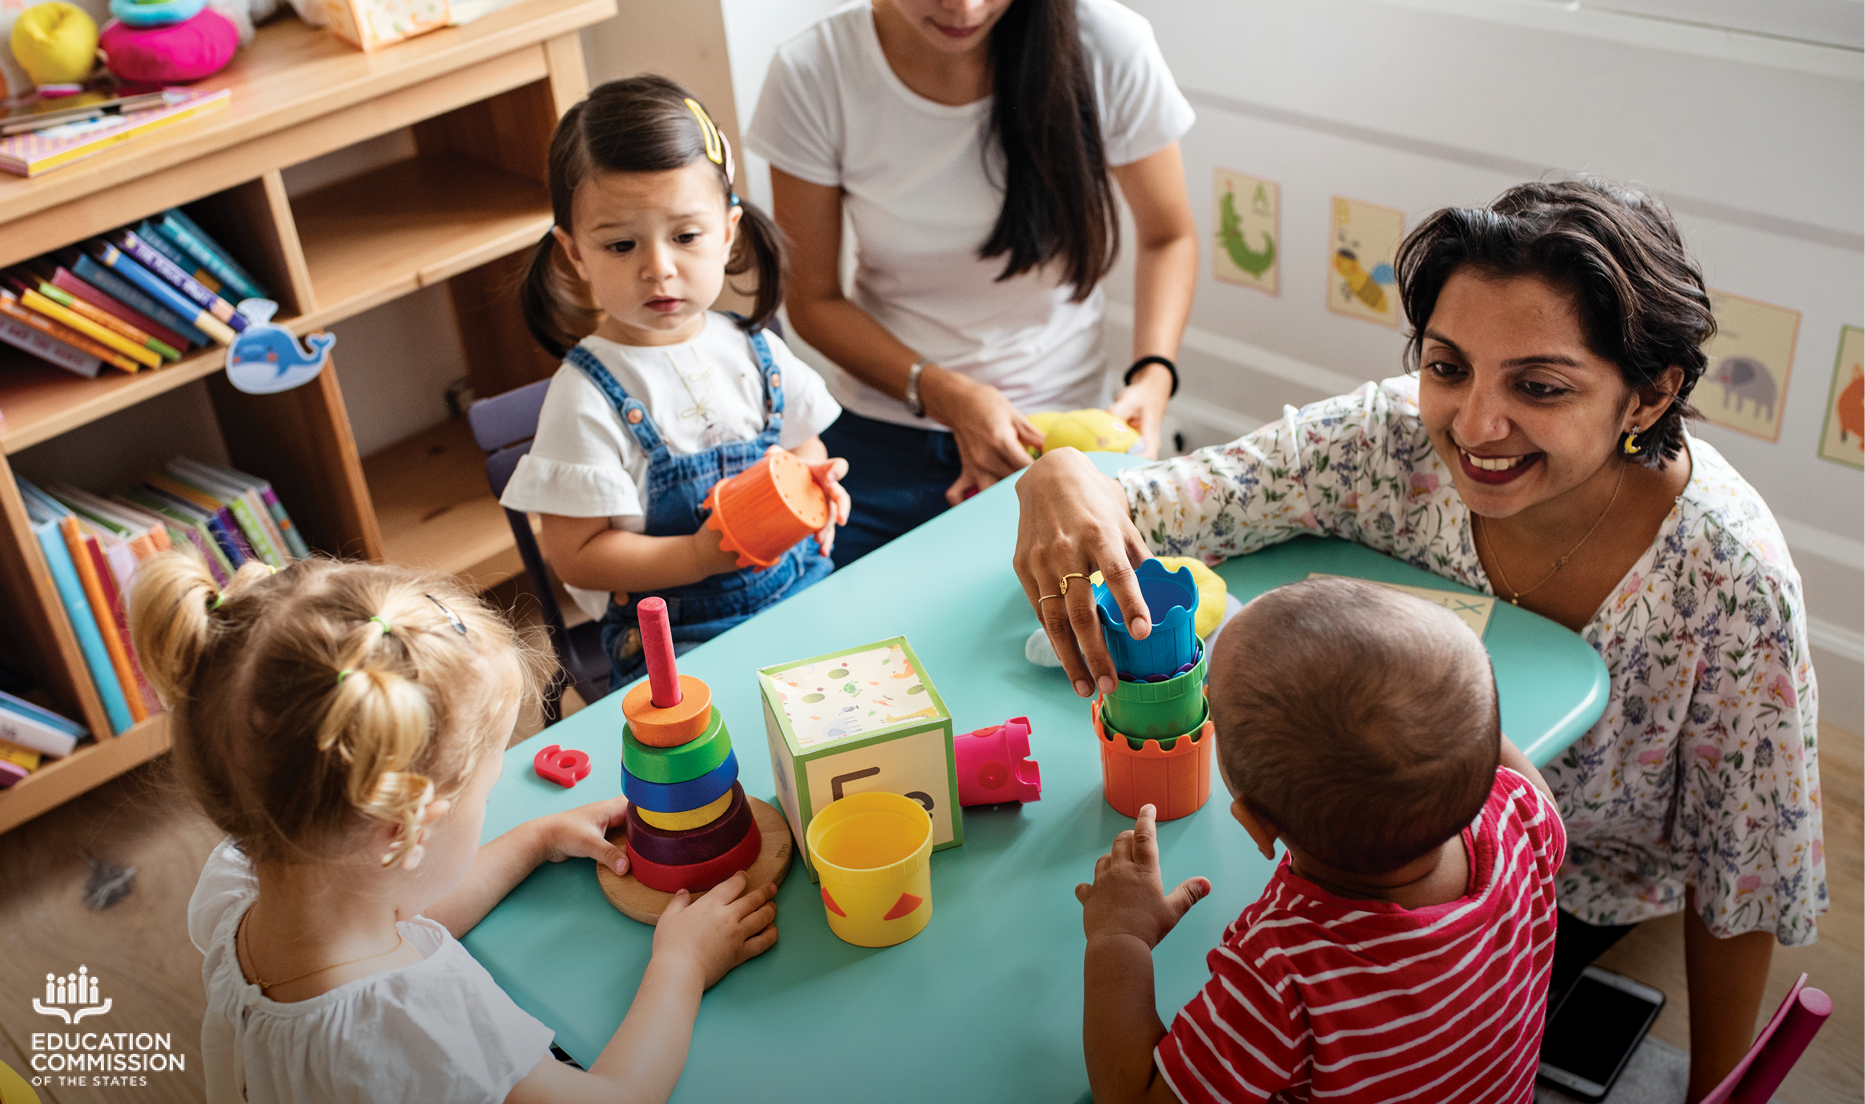 Three young children play with blocks and other toys at a small blue table while two adults assist them. The adult in the frame (who presents as a woman) has short, dark brown hair, olive skin and is wearing a white shirt with colorful flower designs.